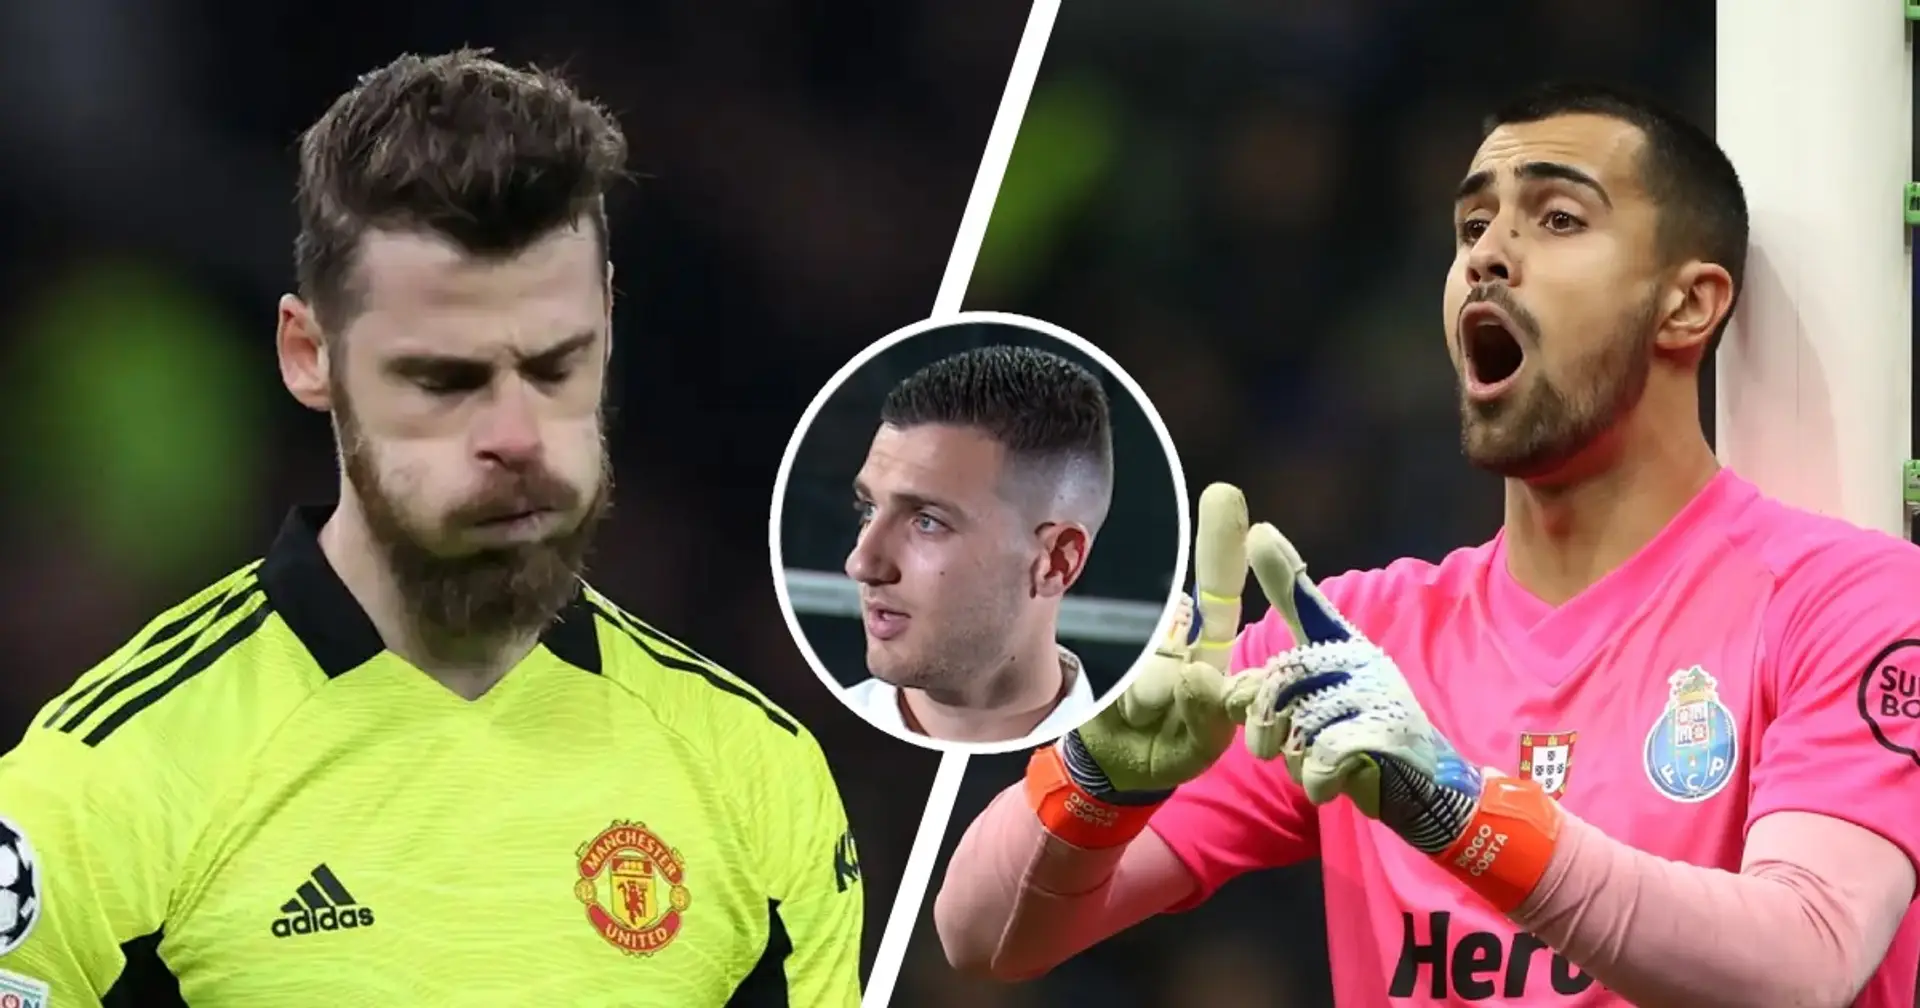 Dalot praises 'differential goalkeeper' linked with Man United amid De Gea exit reports